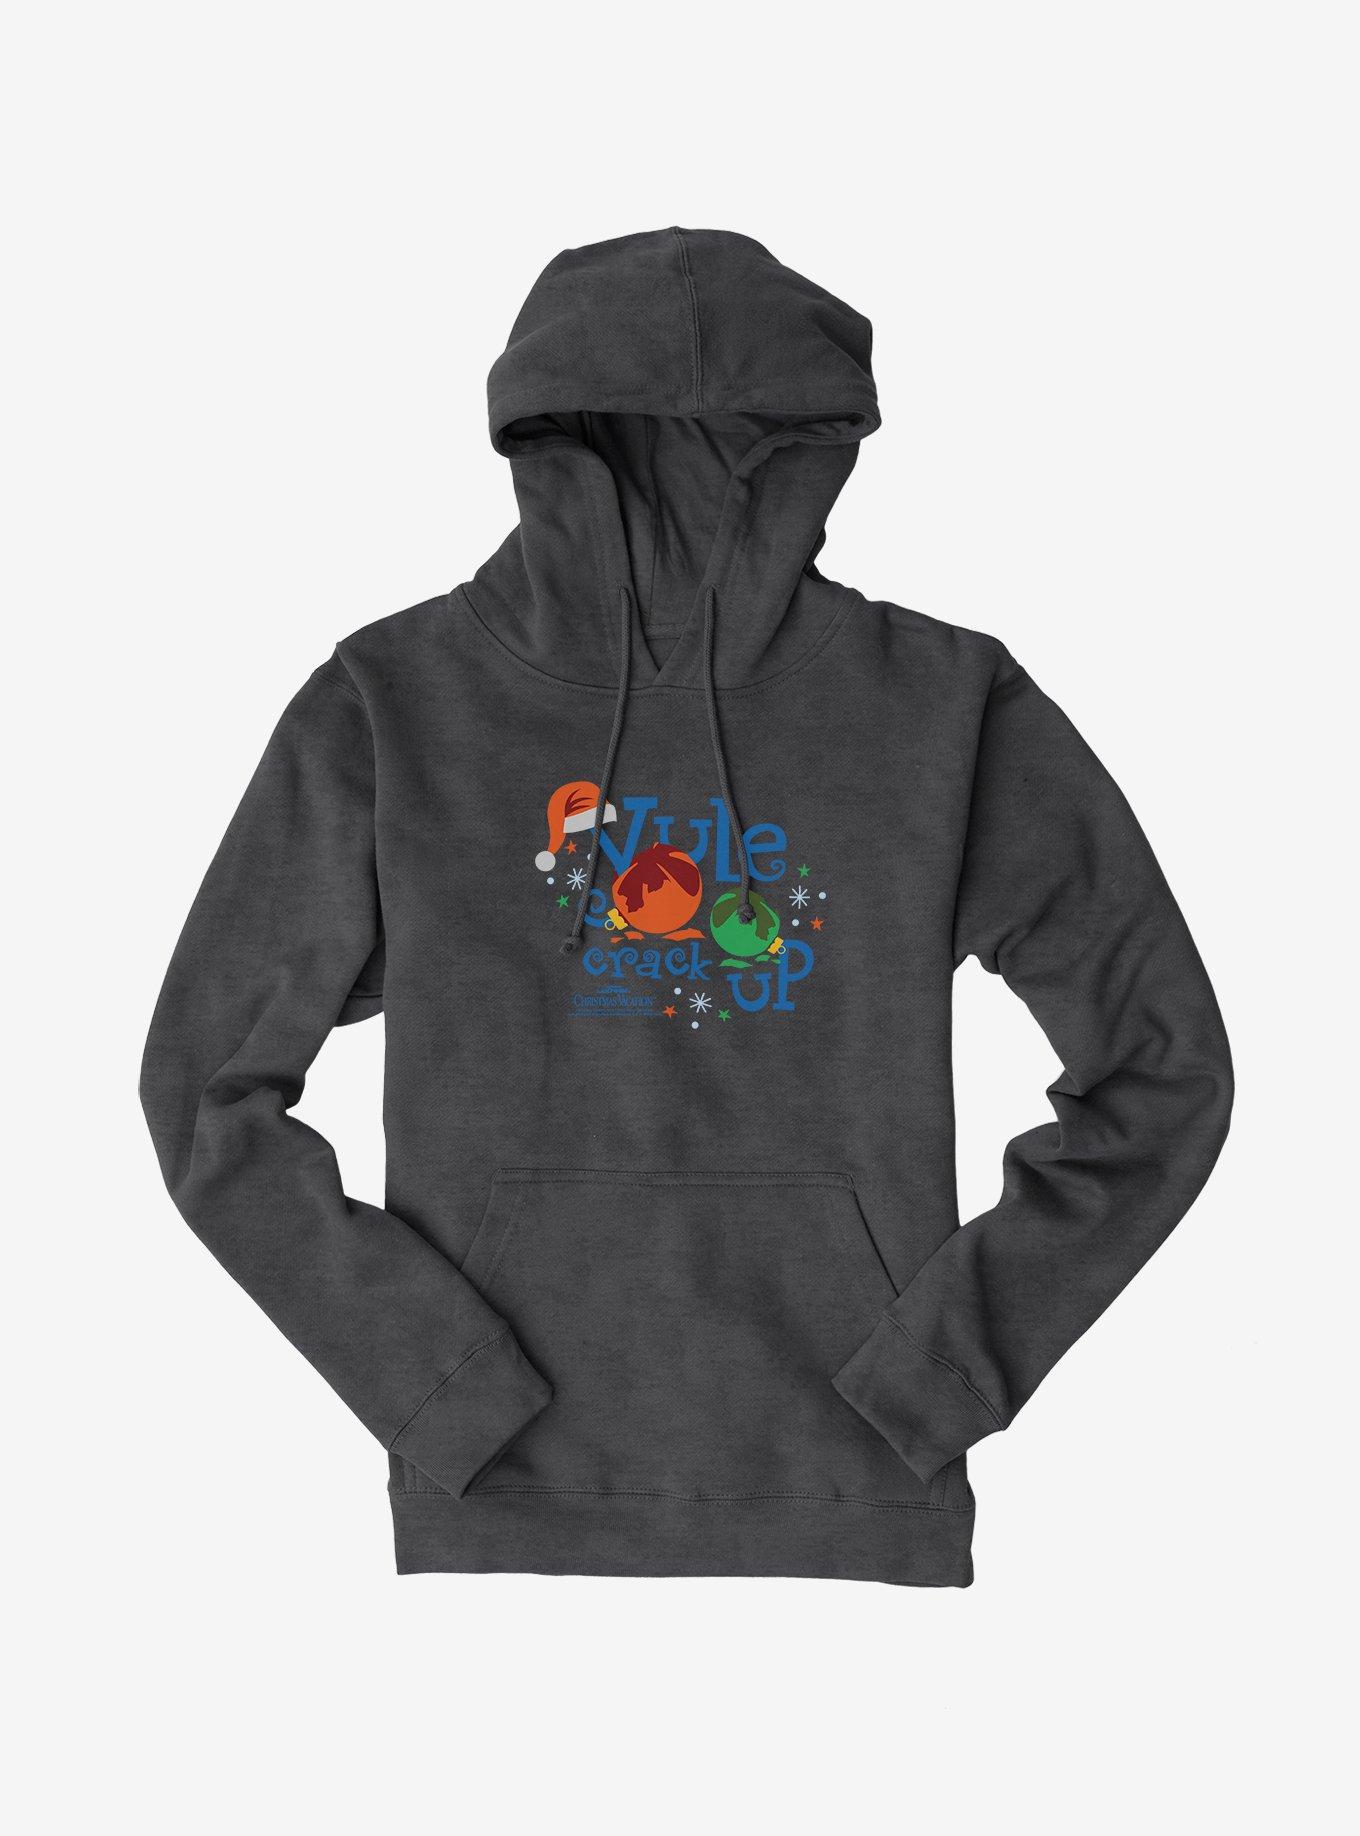 Christmas Vacation Crack Up Hoodie